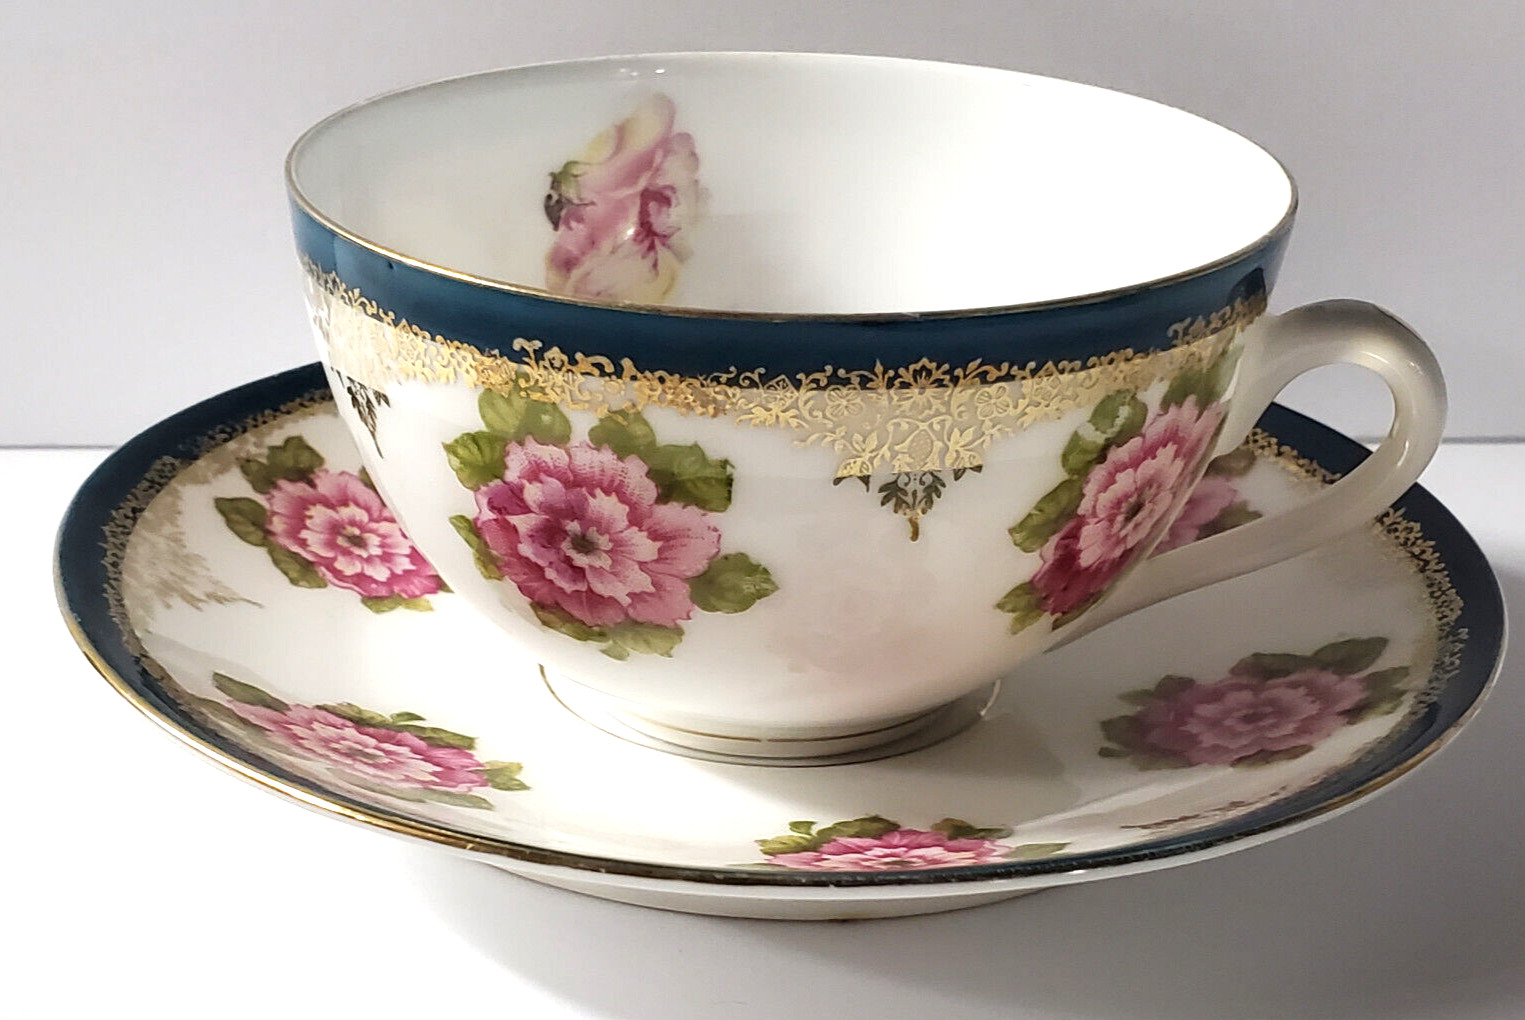 Porcelain Cup Saucer Pink Flowers  Signed The WM H Block Co Indianapolis Indiana